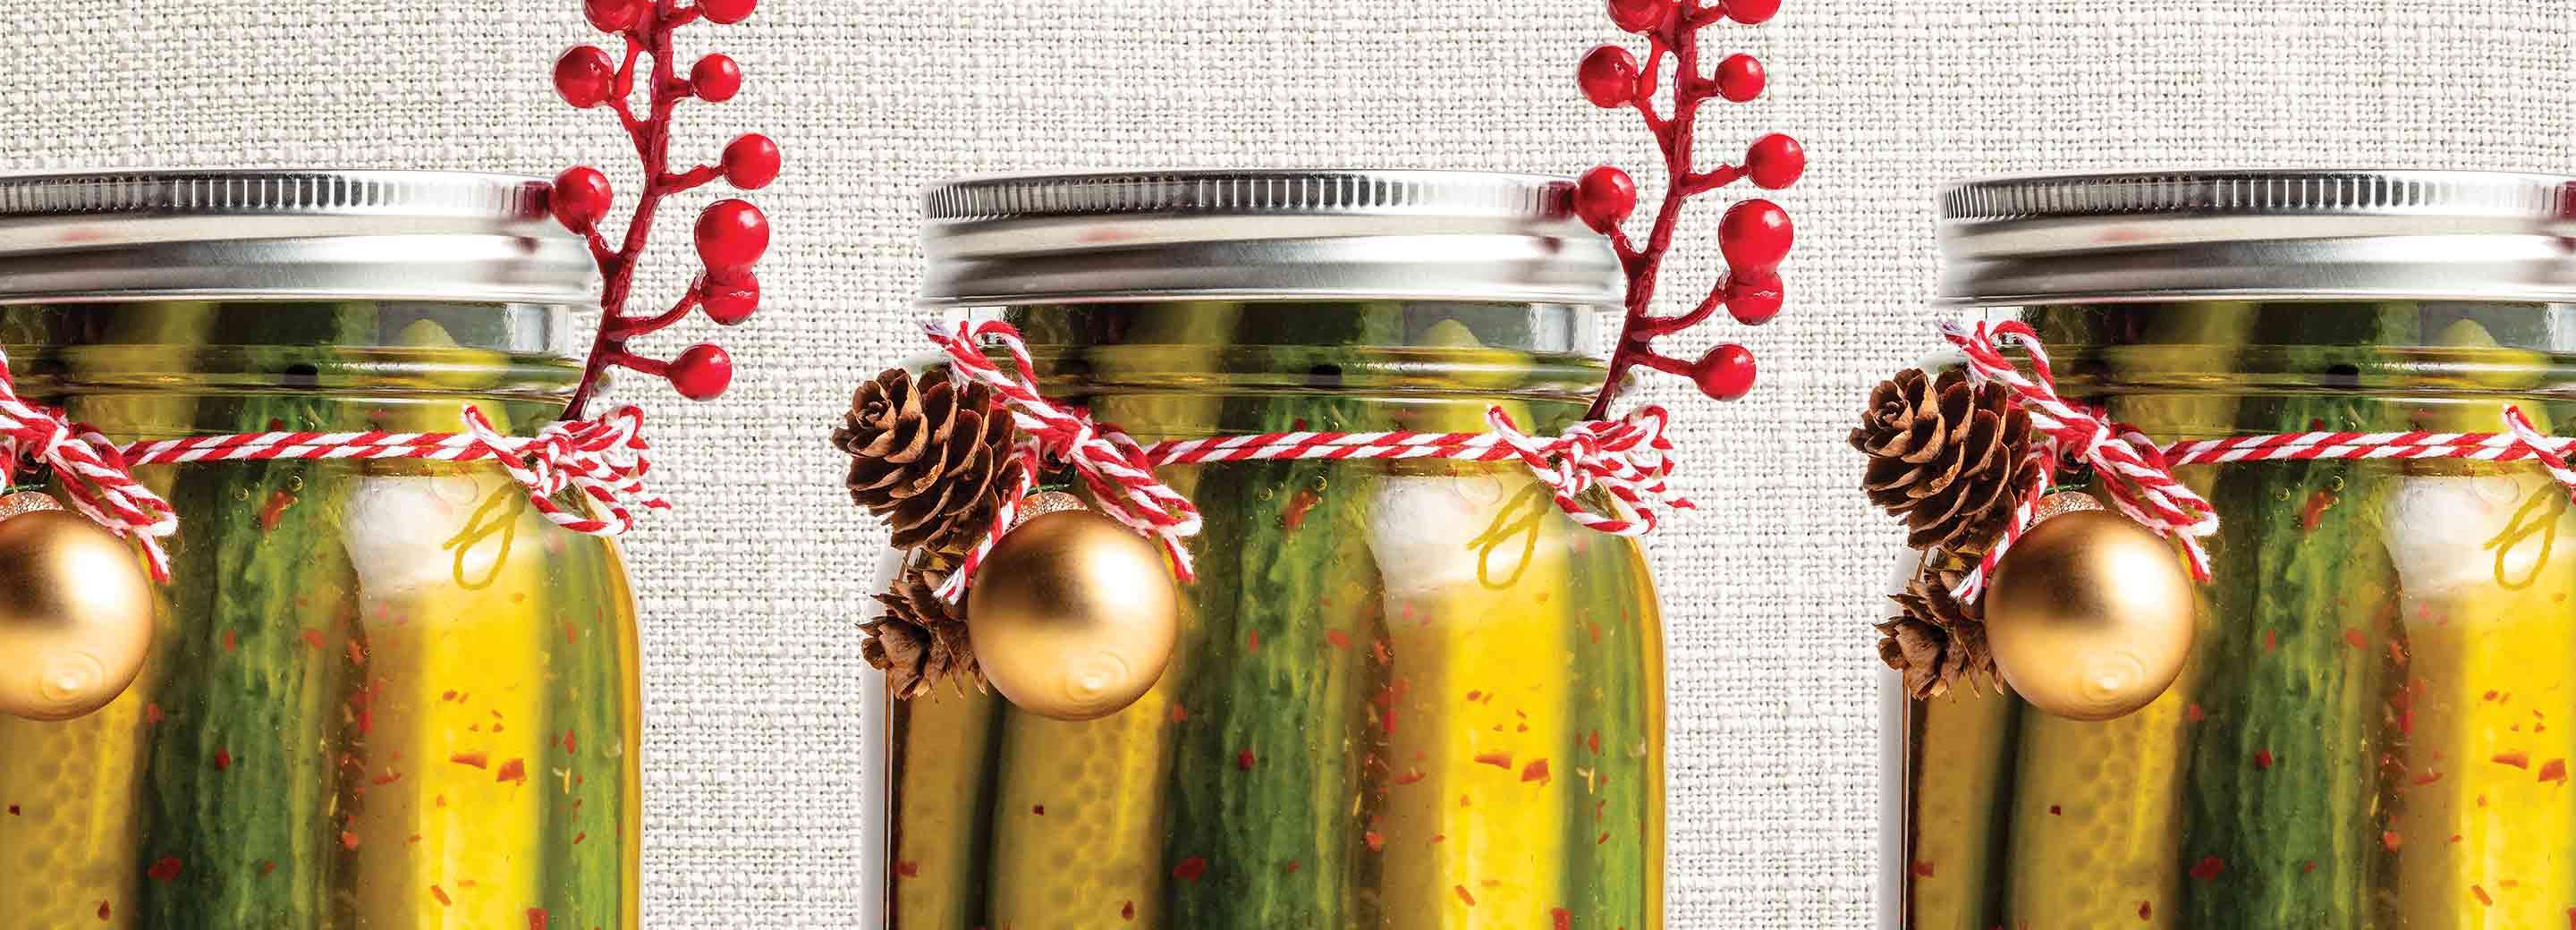 Winter-Spiced Pickles